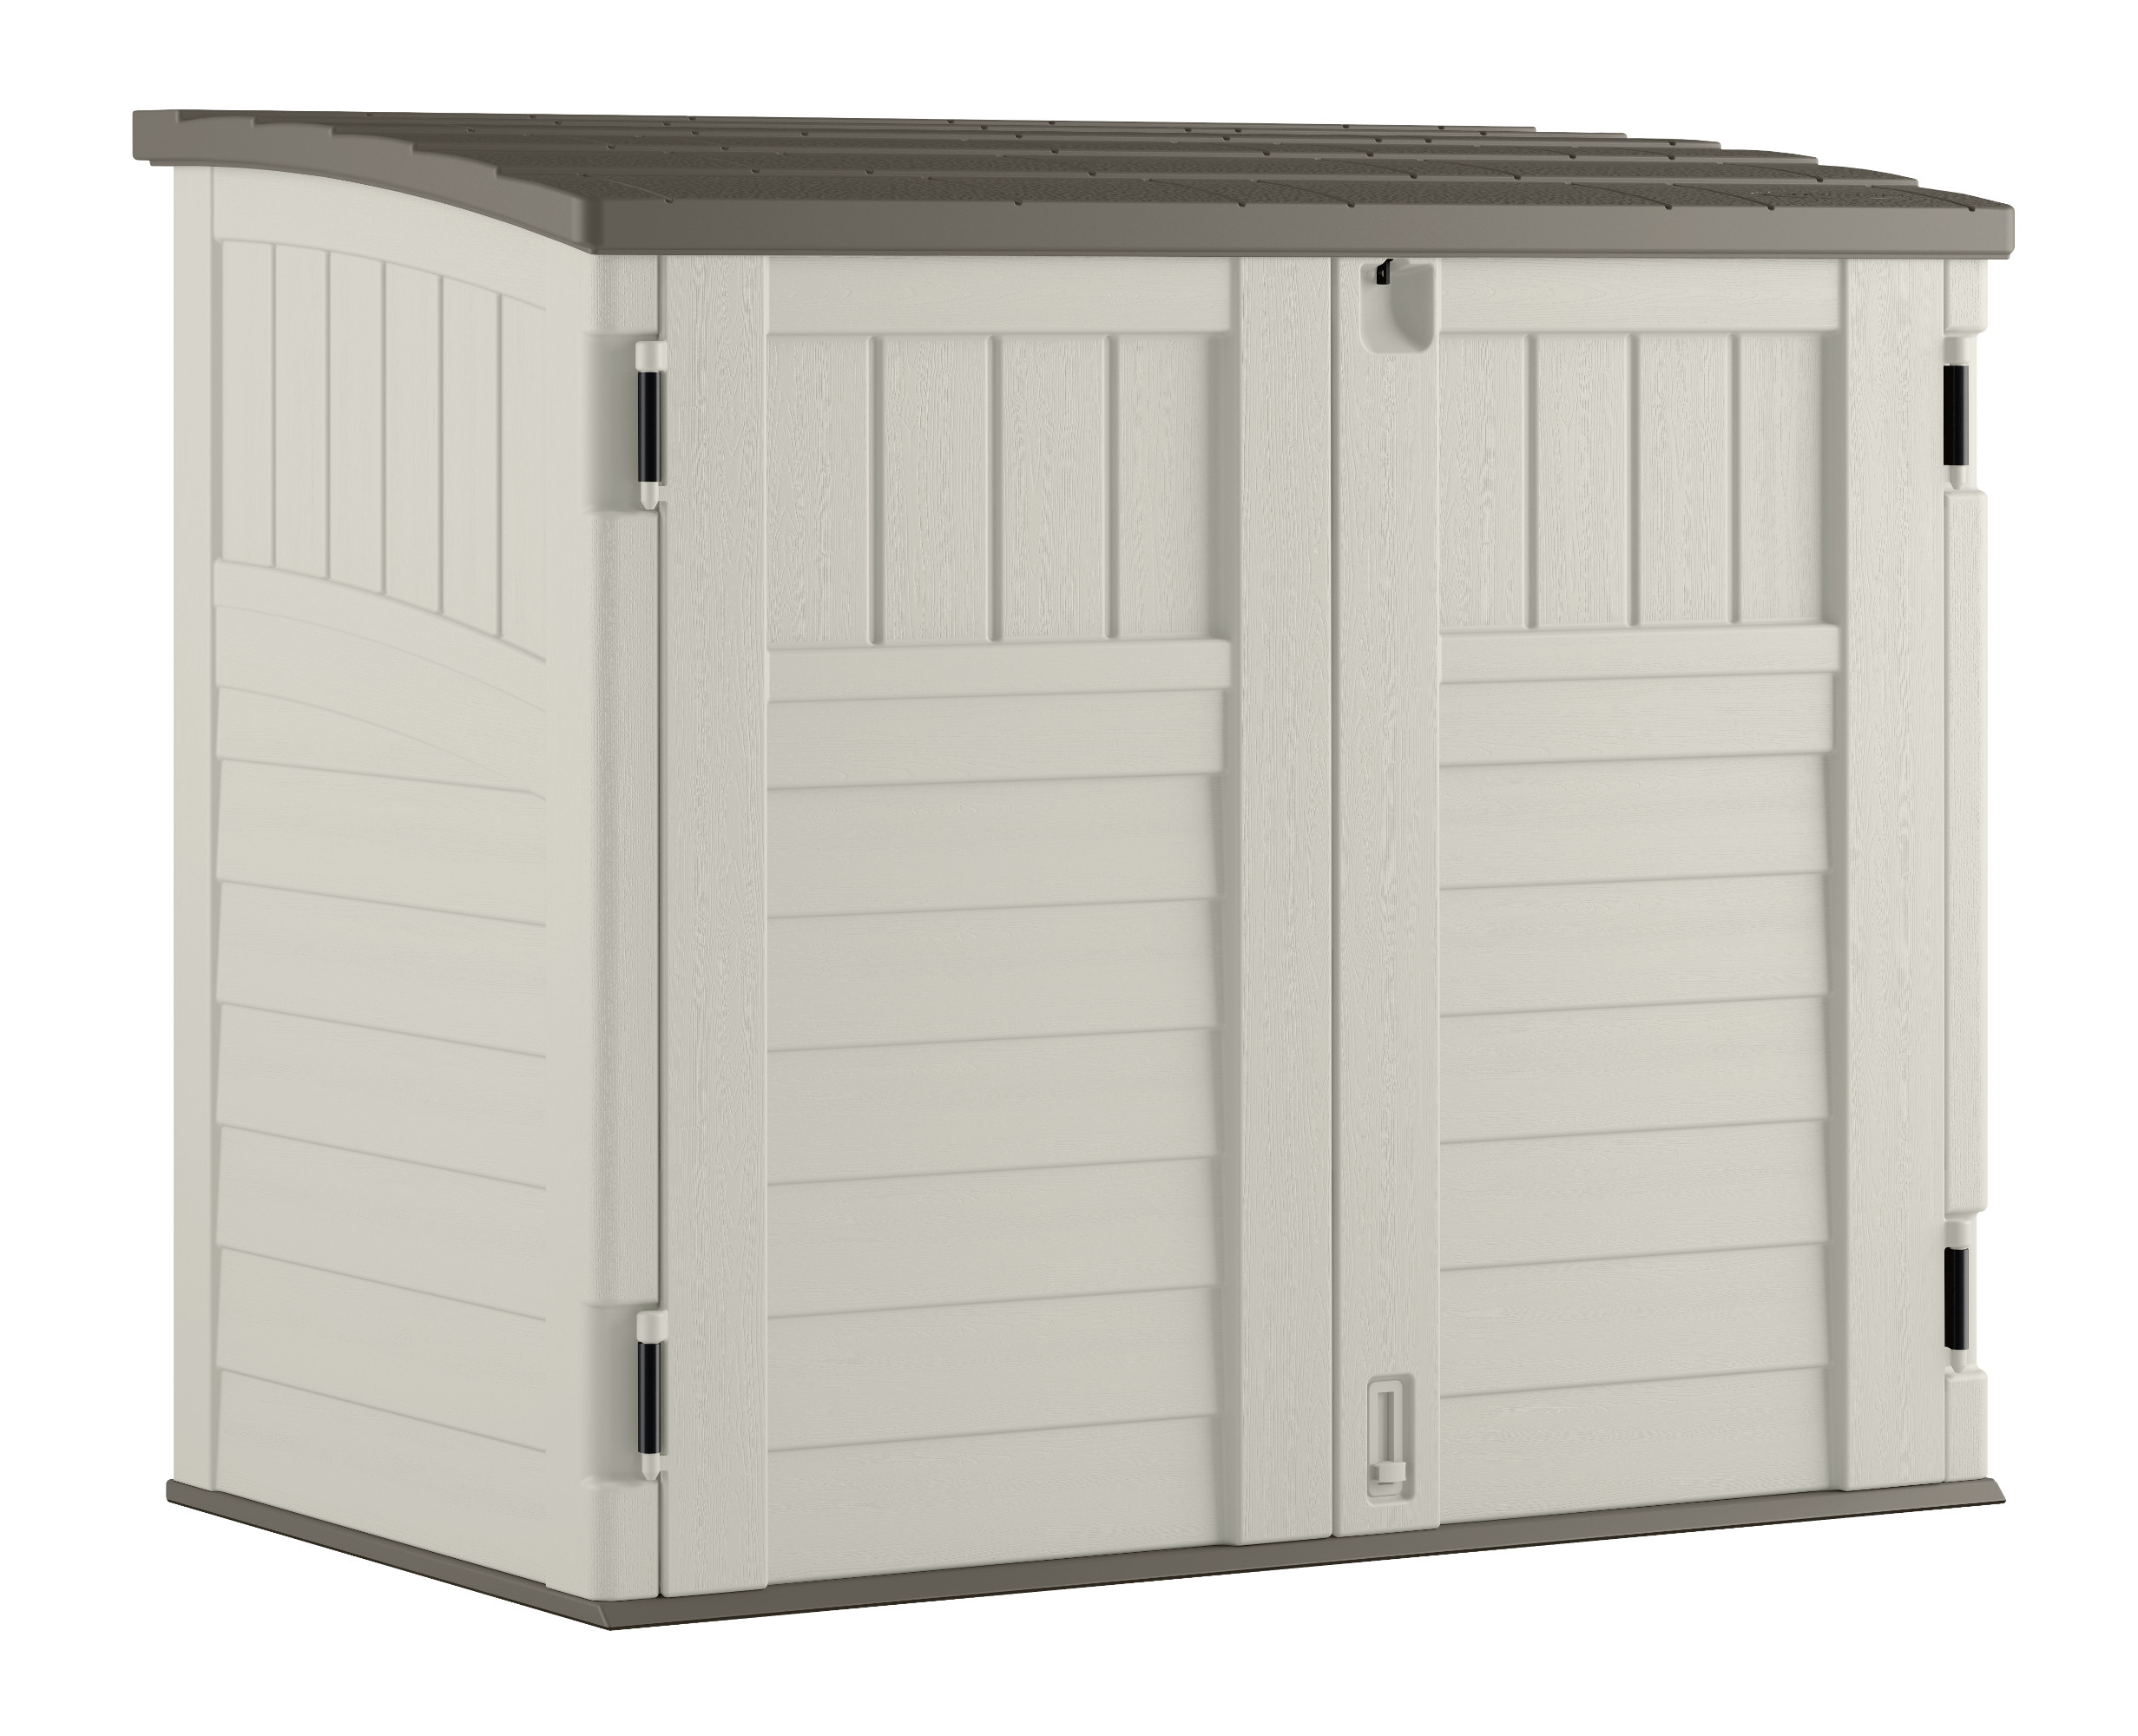 Suncast 34 cu. ft. Horizontal Outdoor Resin Storage Shed, Vanilla, 53 in D x 45.5 in H x 32.25 in W - image 1 of 10